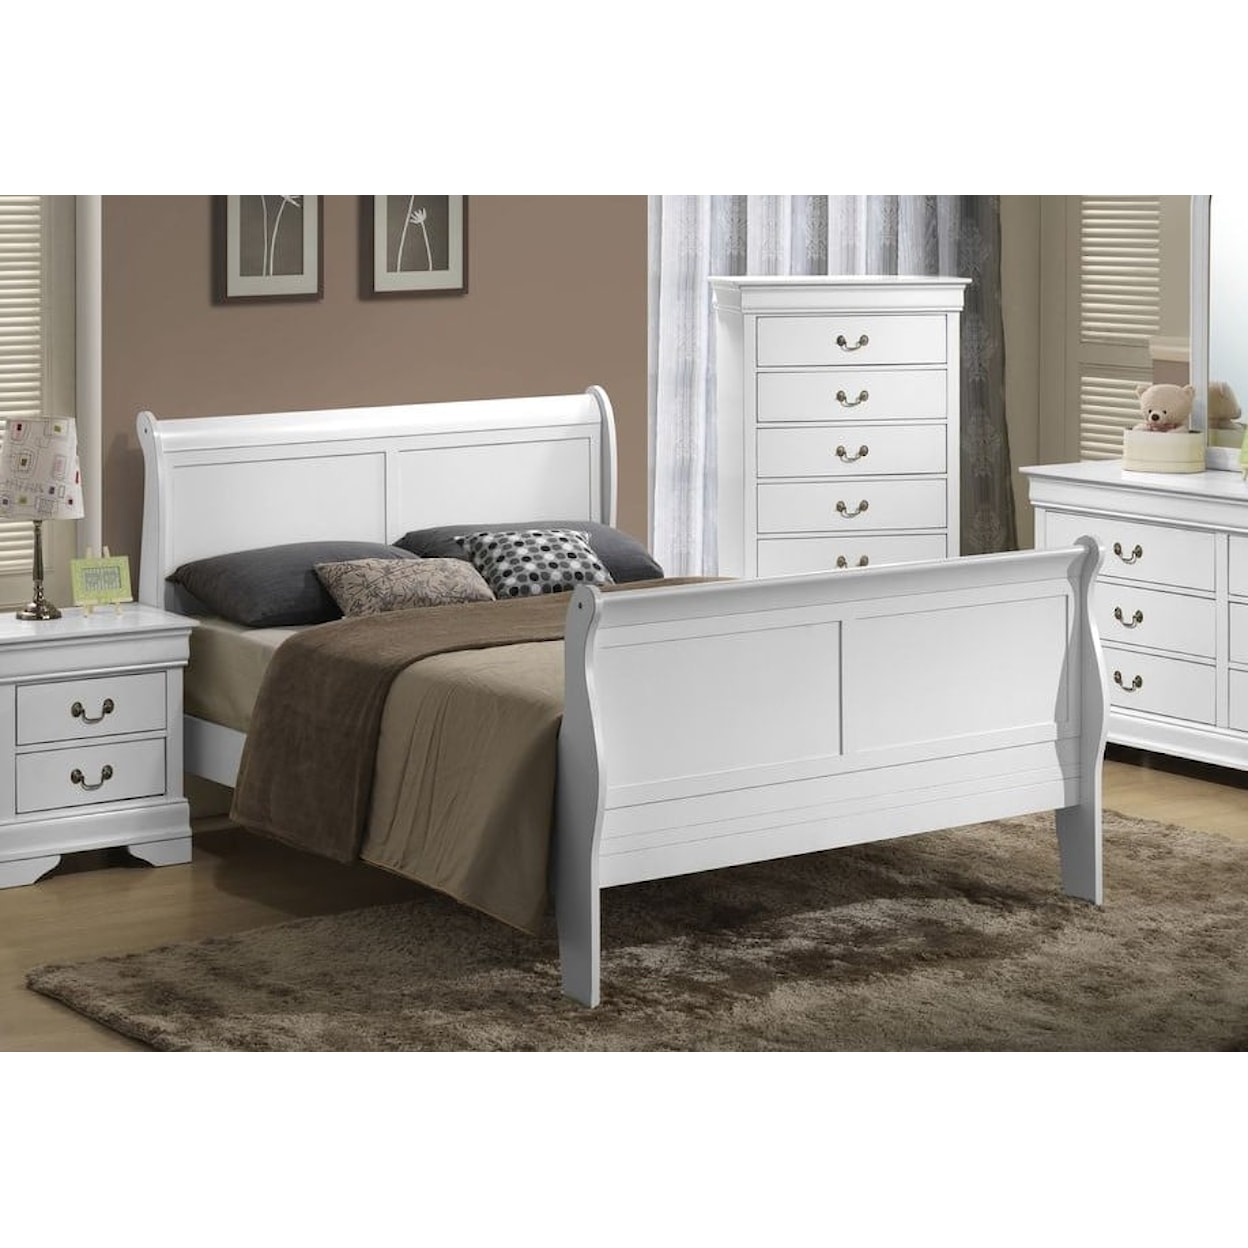 Lifestyle C4936A 5 Piece Queen Bedroom Set with Chest